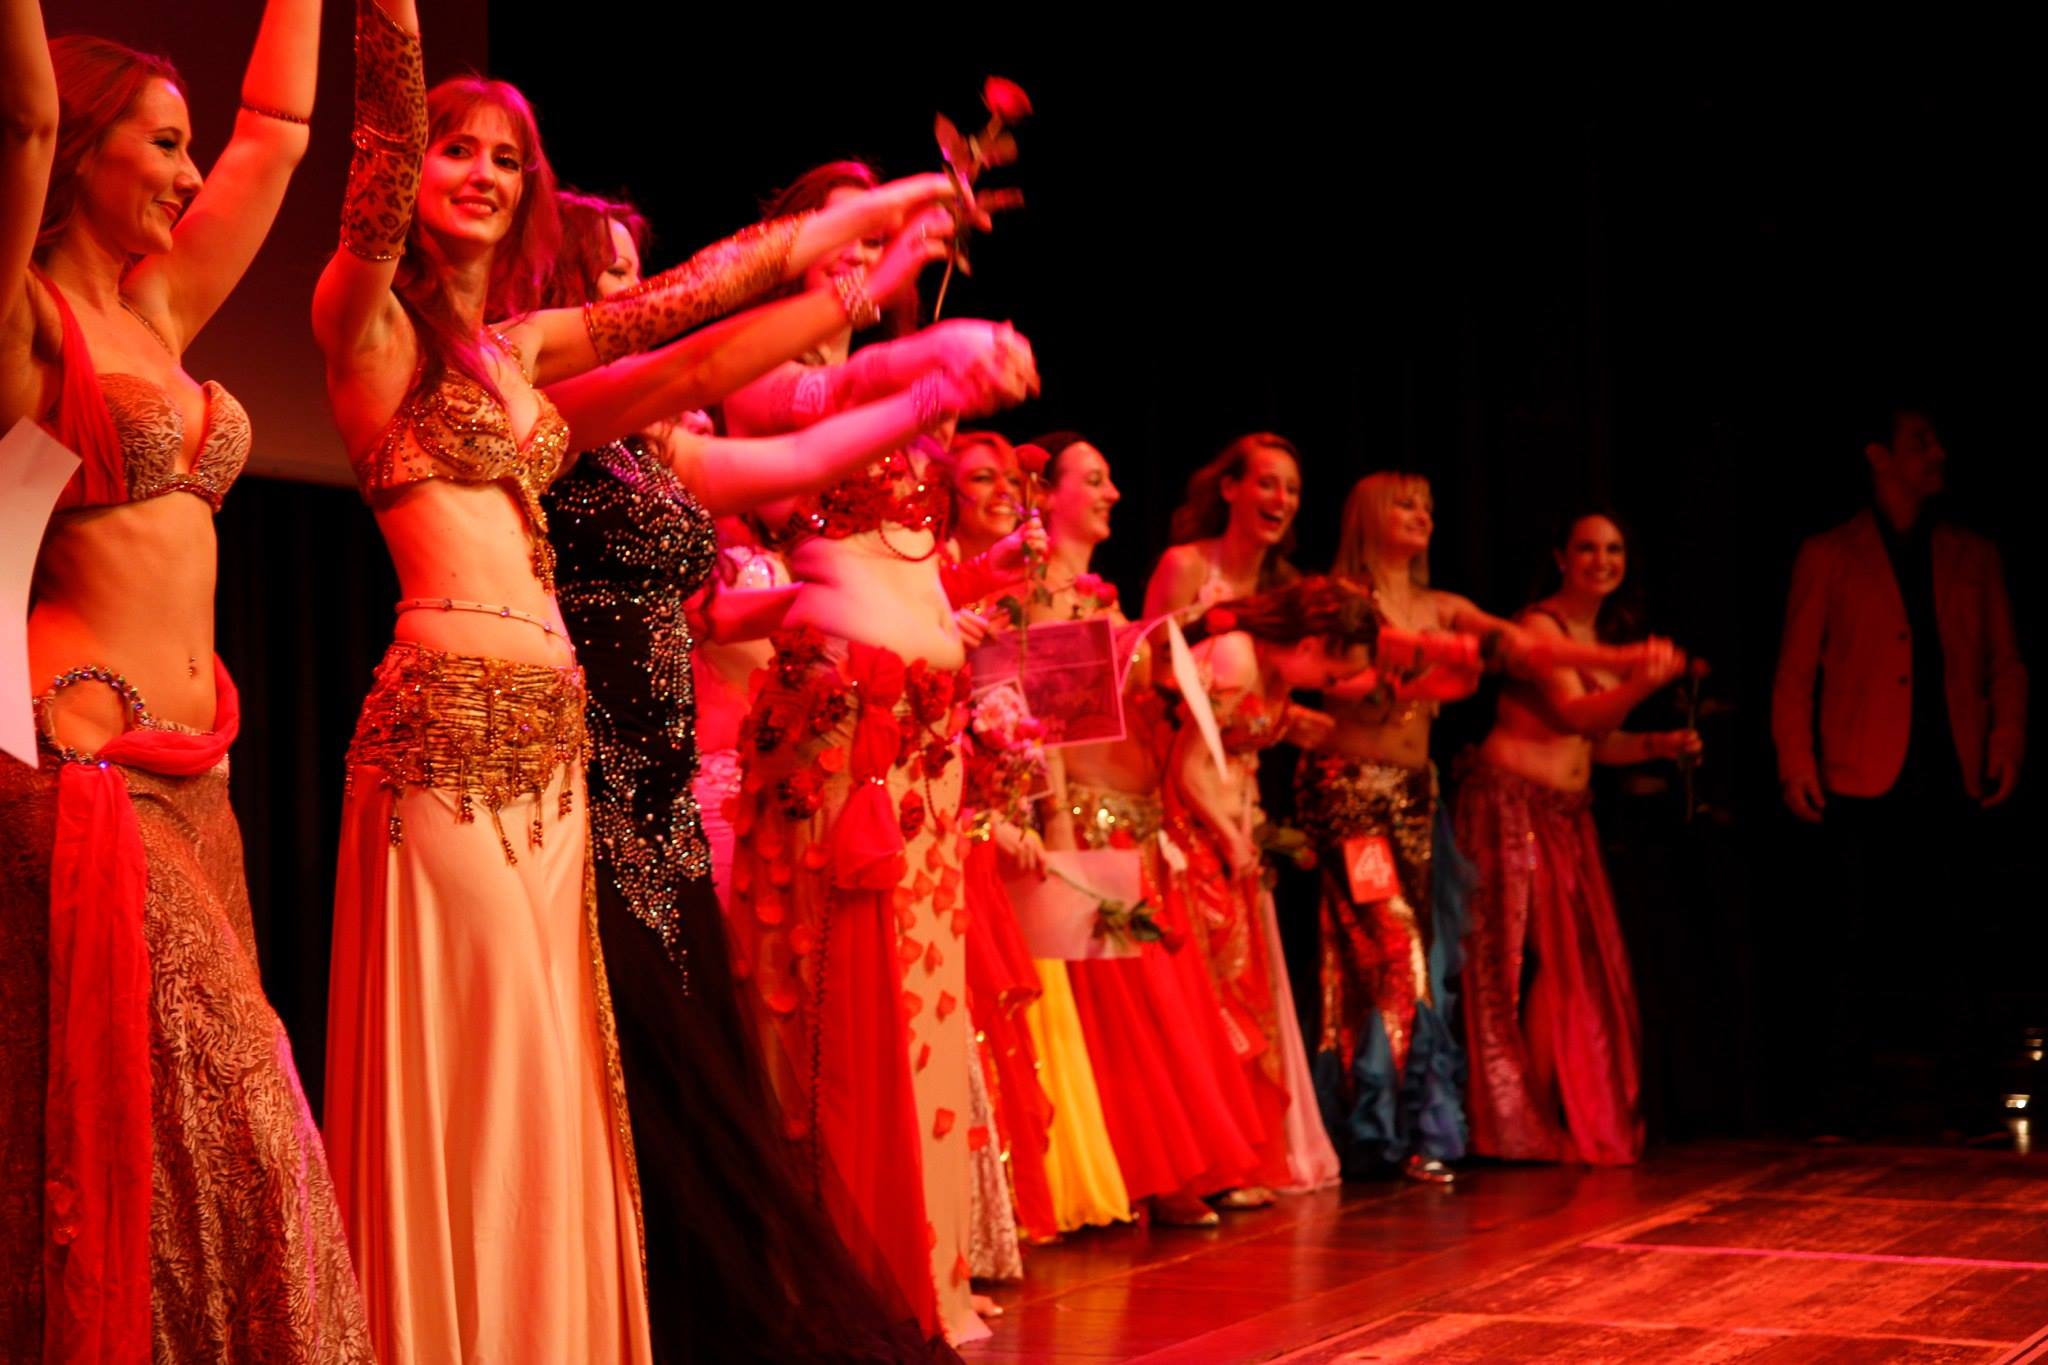 A row of women in belly dance costumes